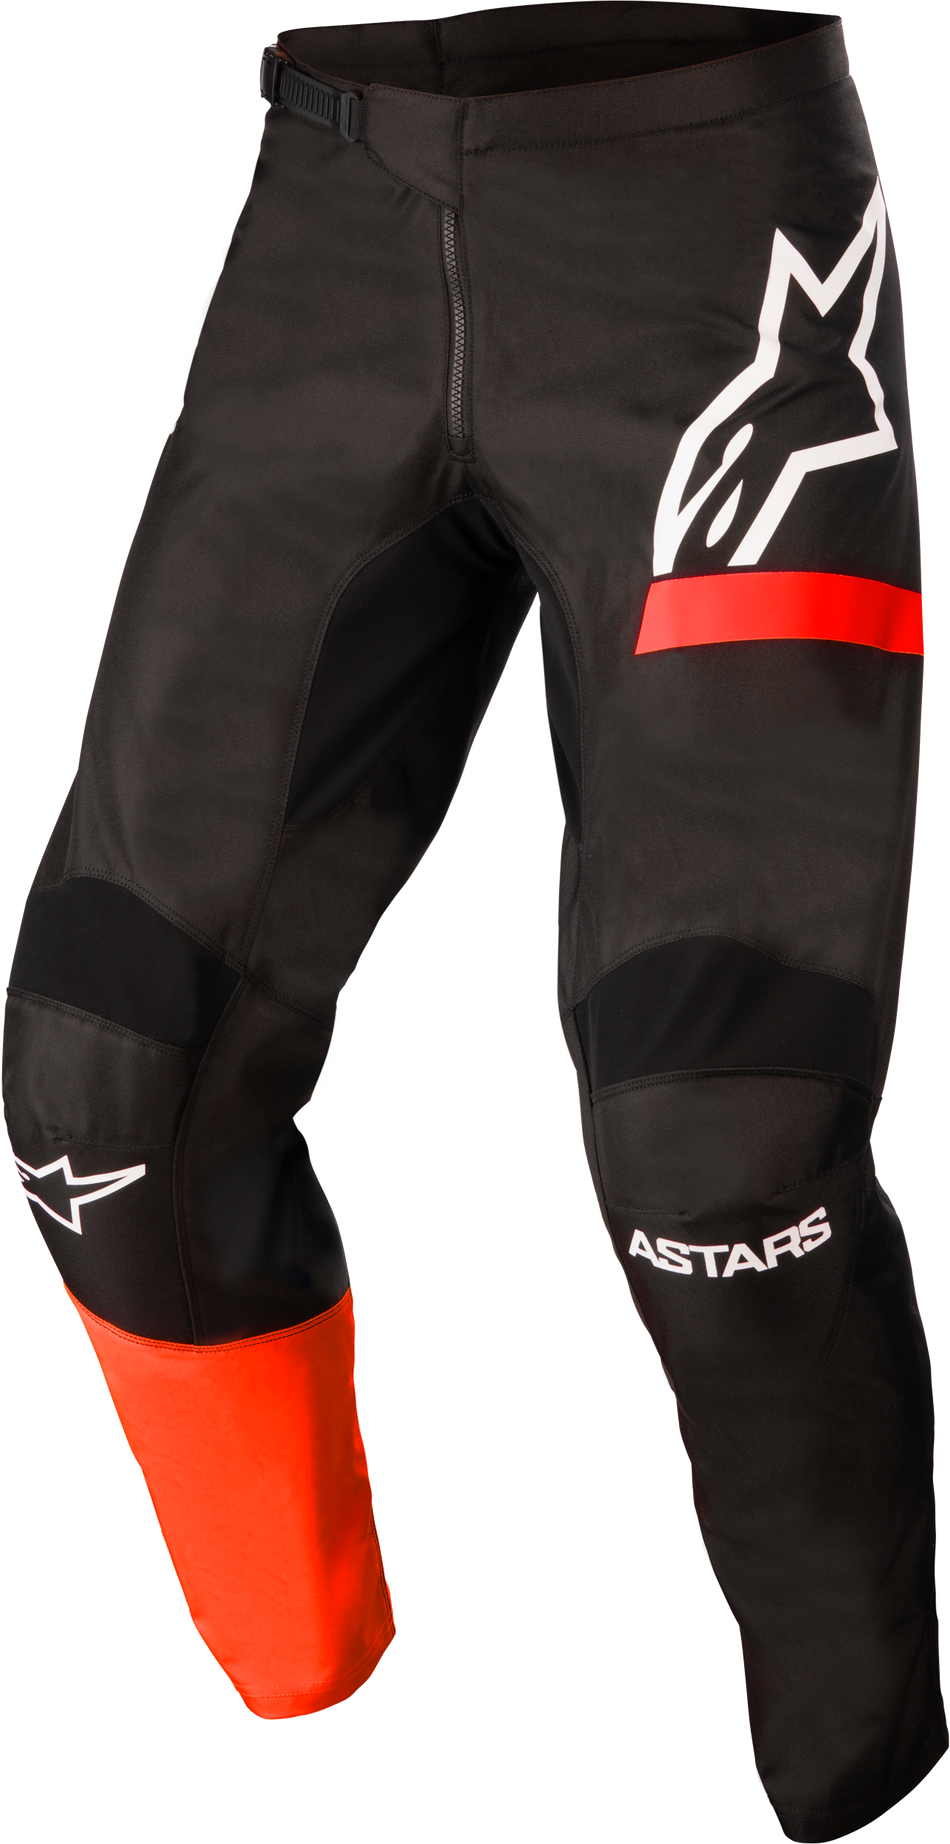 ALPINESTARS Youth Racer Chaser Pants Black/Bright Red Sz 28 3742422-1303-28